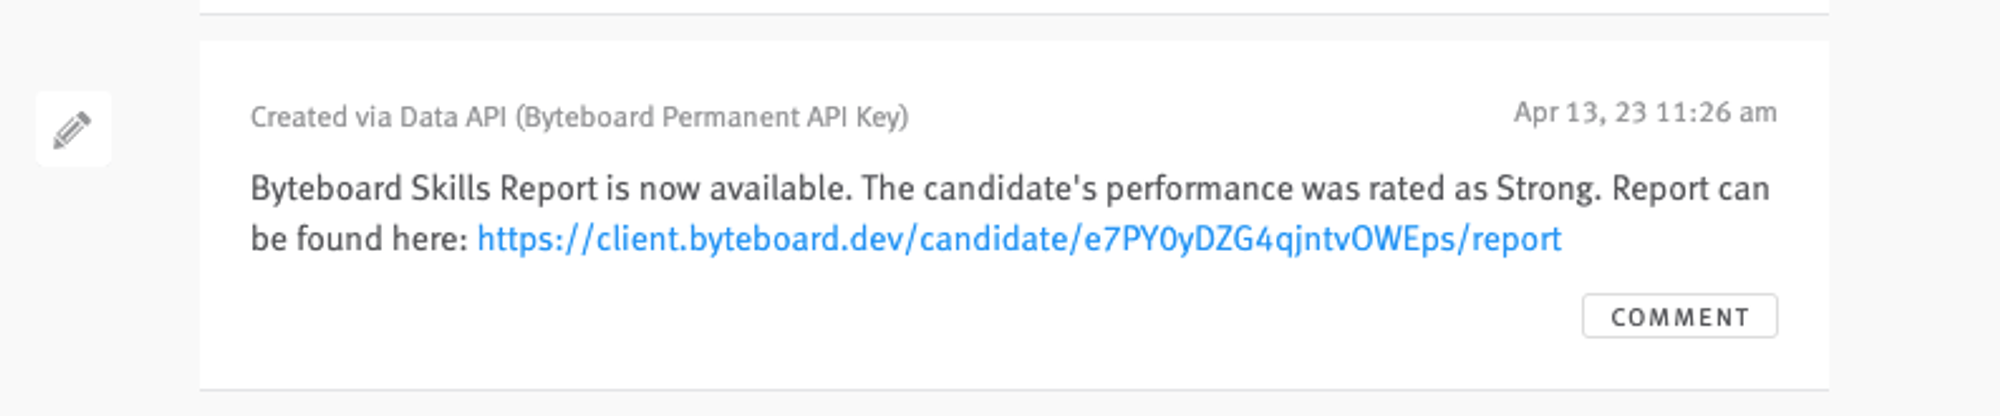 Example note on candidate record in Lever — the URL leads to the candidate’s graded Byteboard Interview and Skills Report